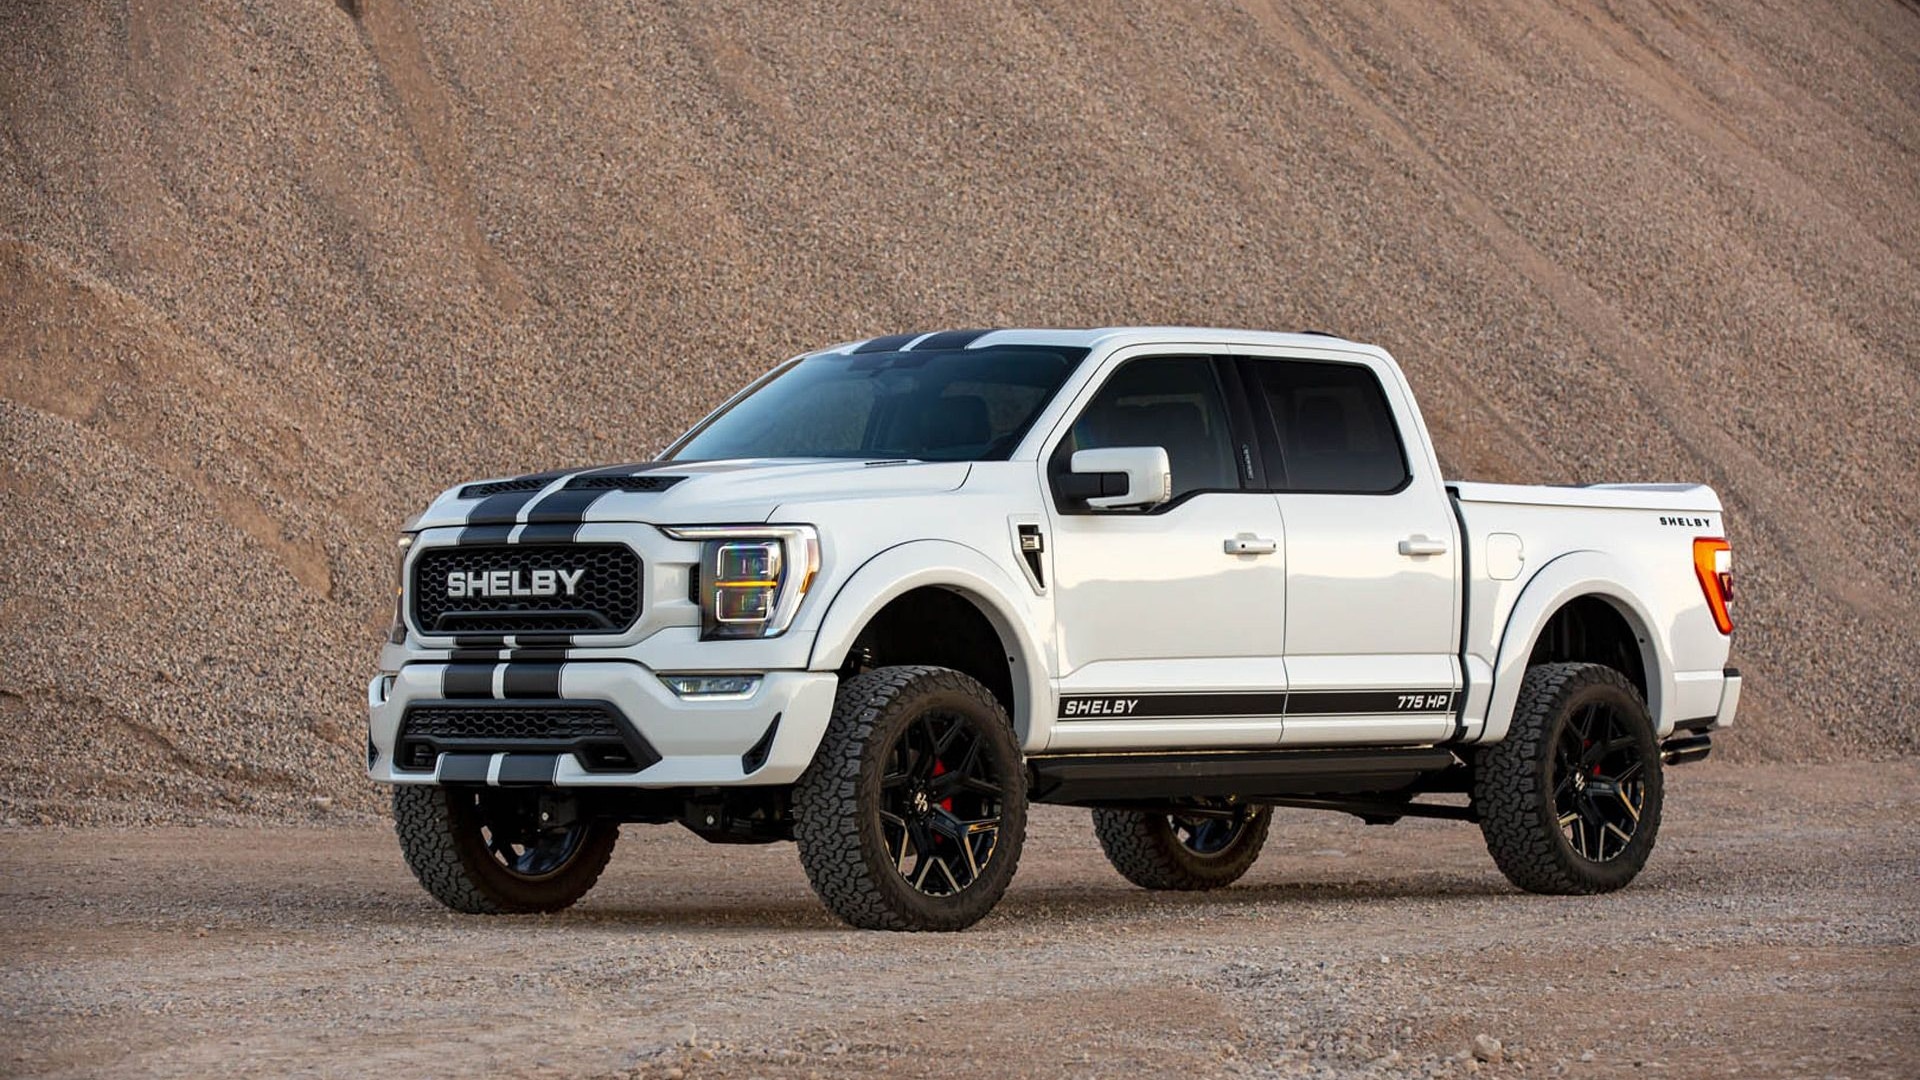 2021 Ford Shelby F150 rolls in with 775 hp